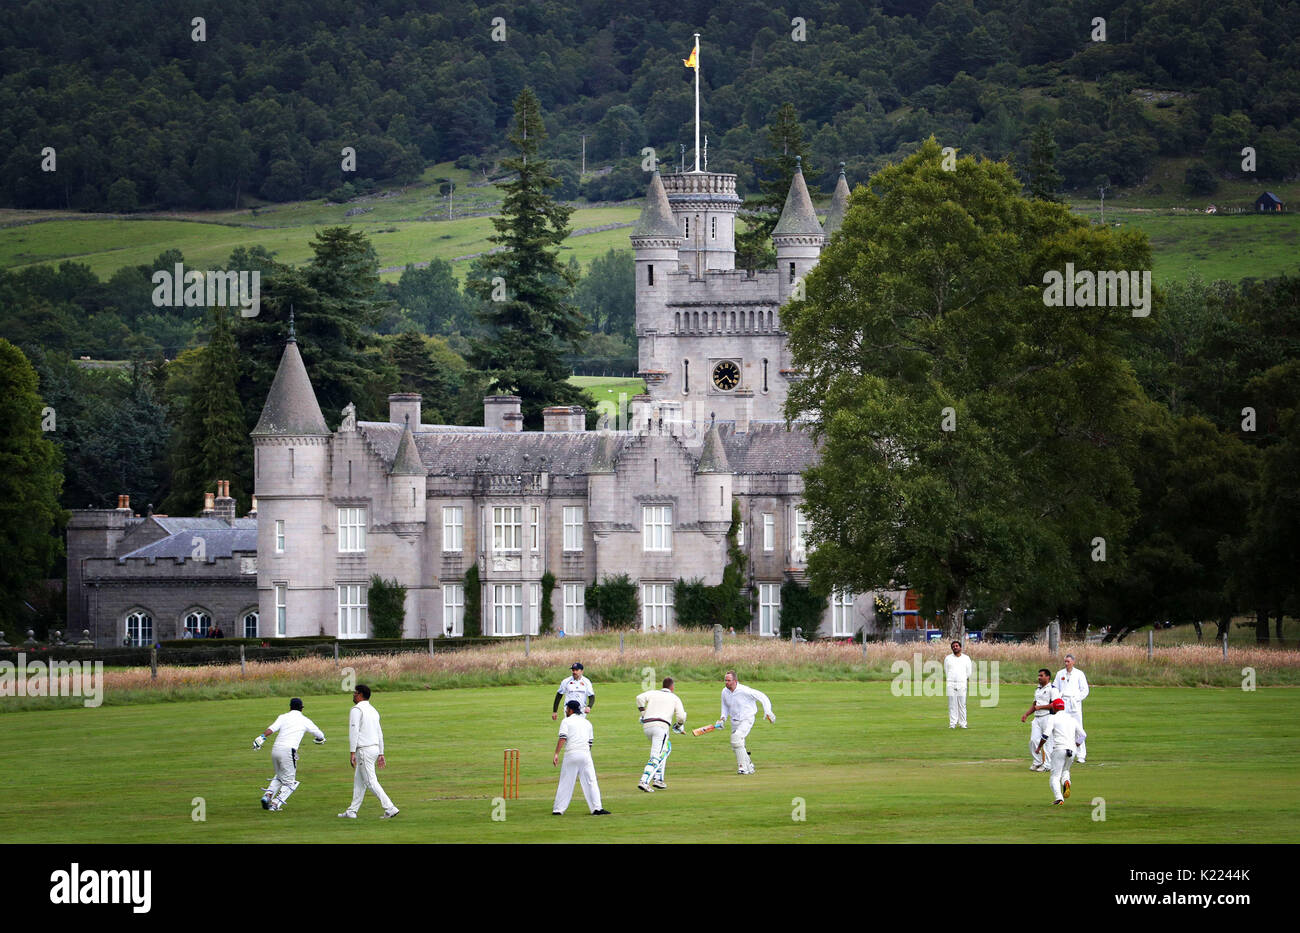 Crathie Cricket Club play against Aberdeen Super Kings, at their ground on the Balmoral Estate on Saturday July 29, 2017. Stock Photo